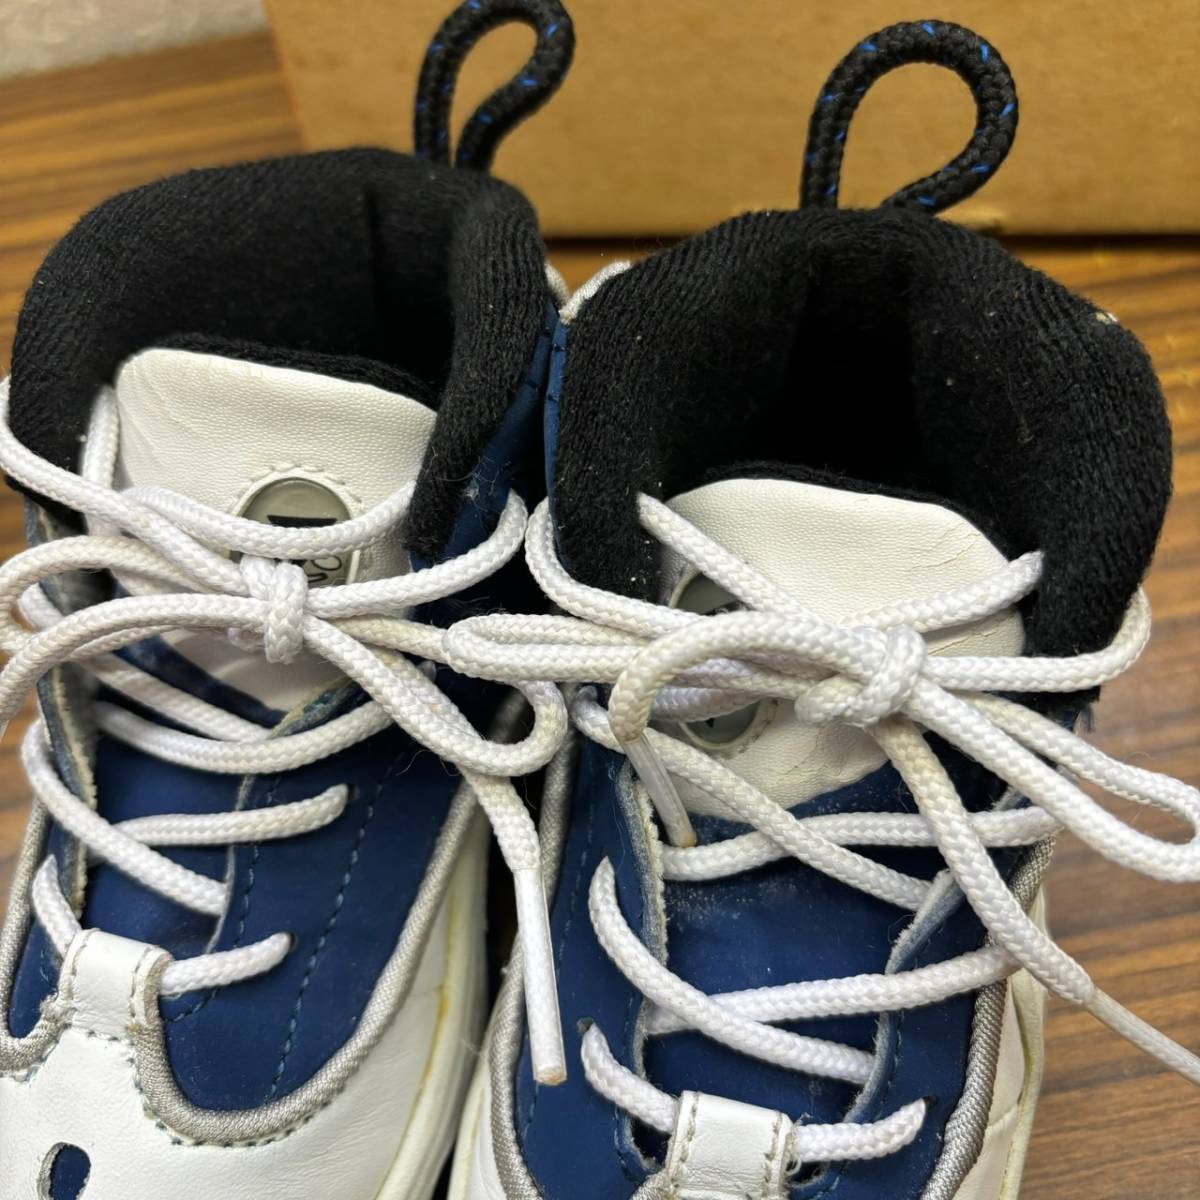  shoes * NIKE * air baby kids sneakers 12cm white x navy blue x black * Nike * man girl shoes boxed 